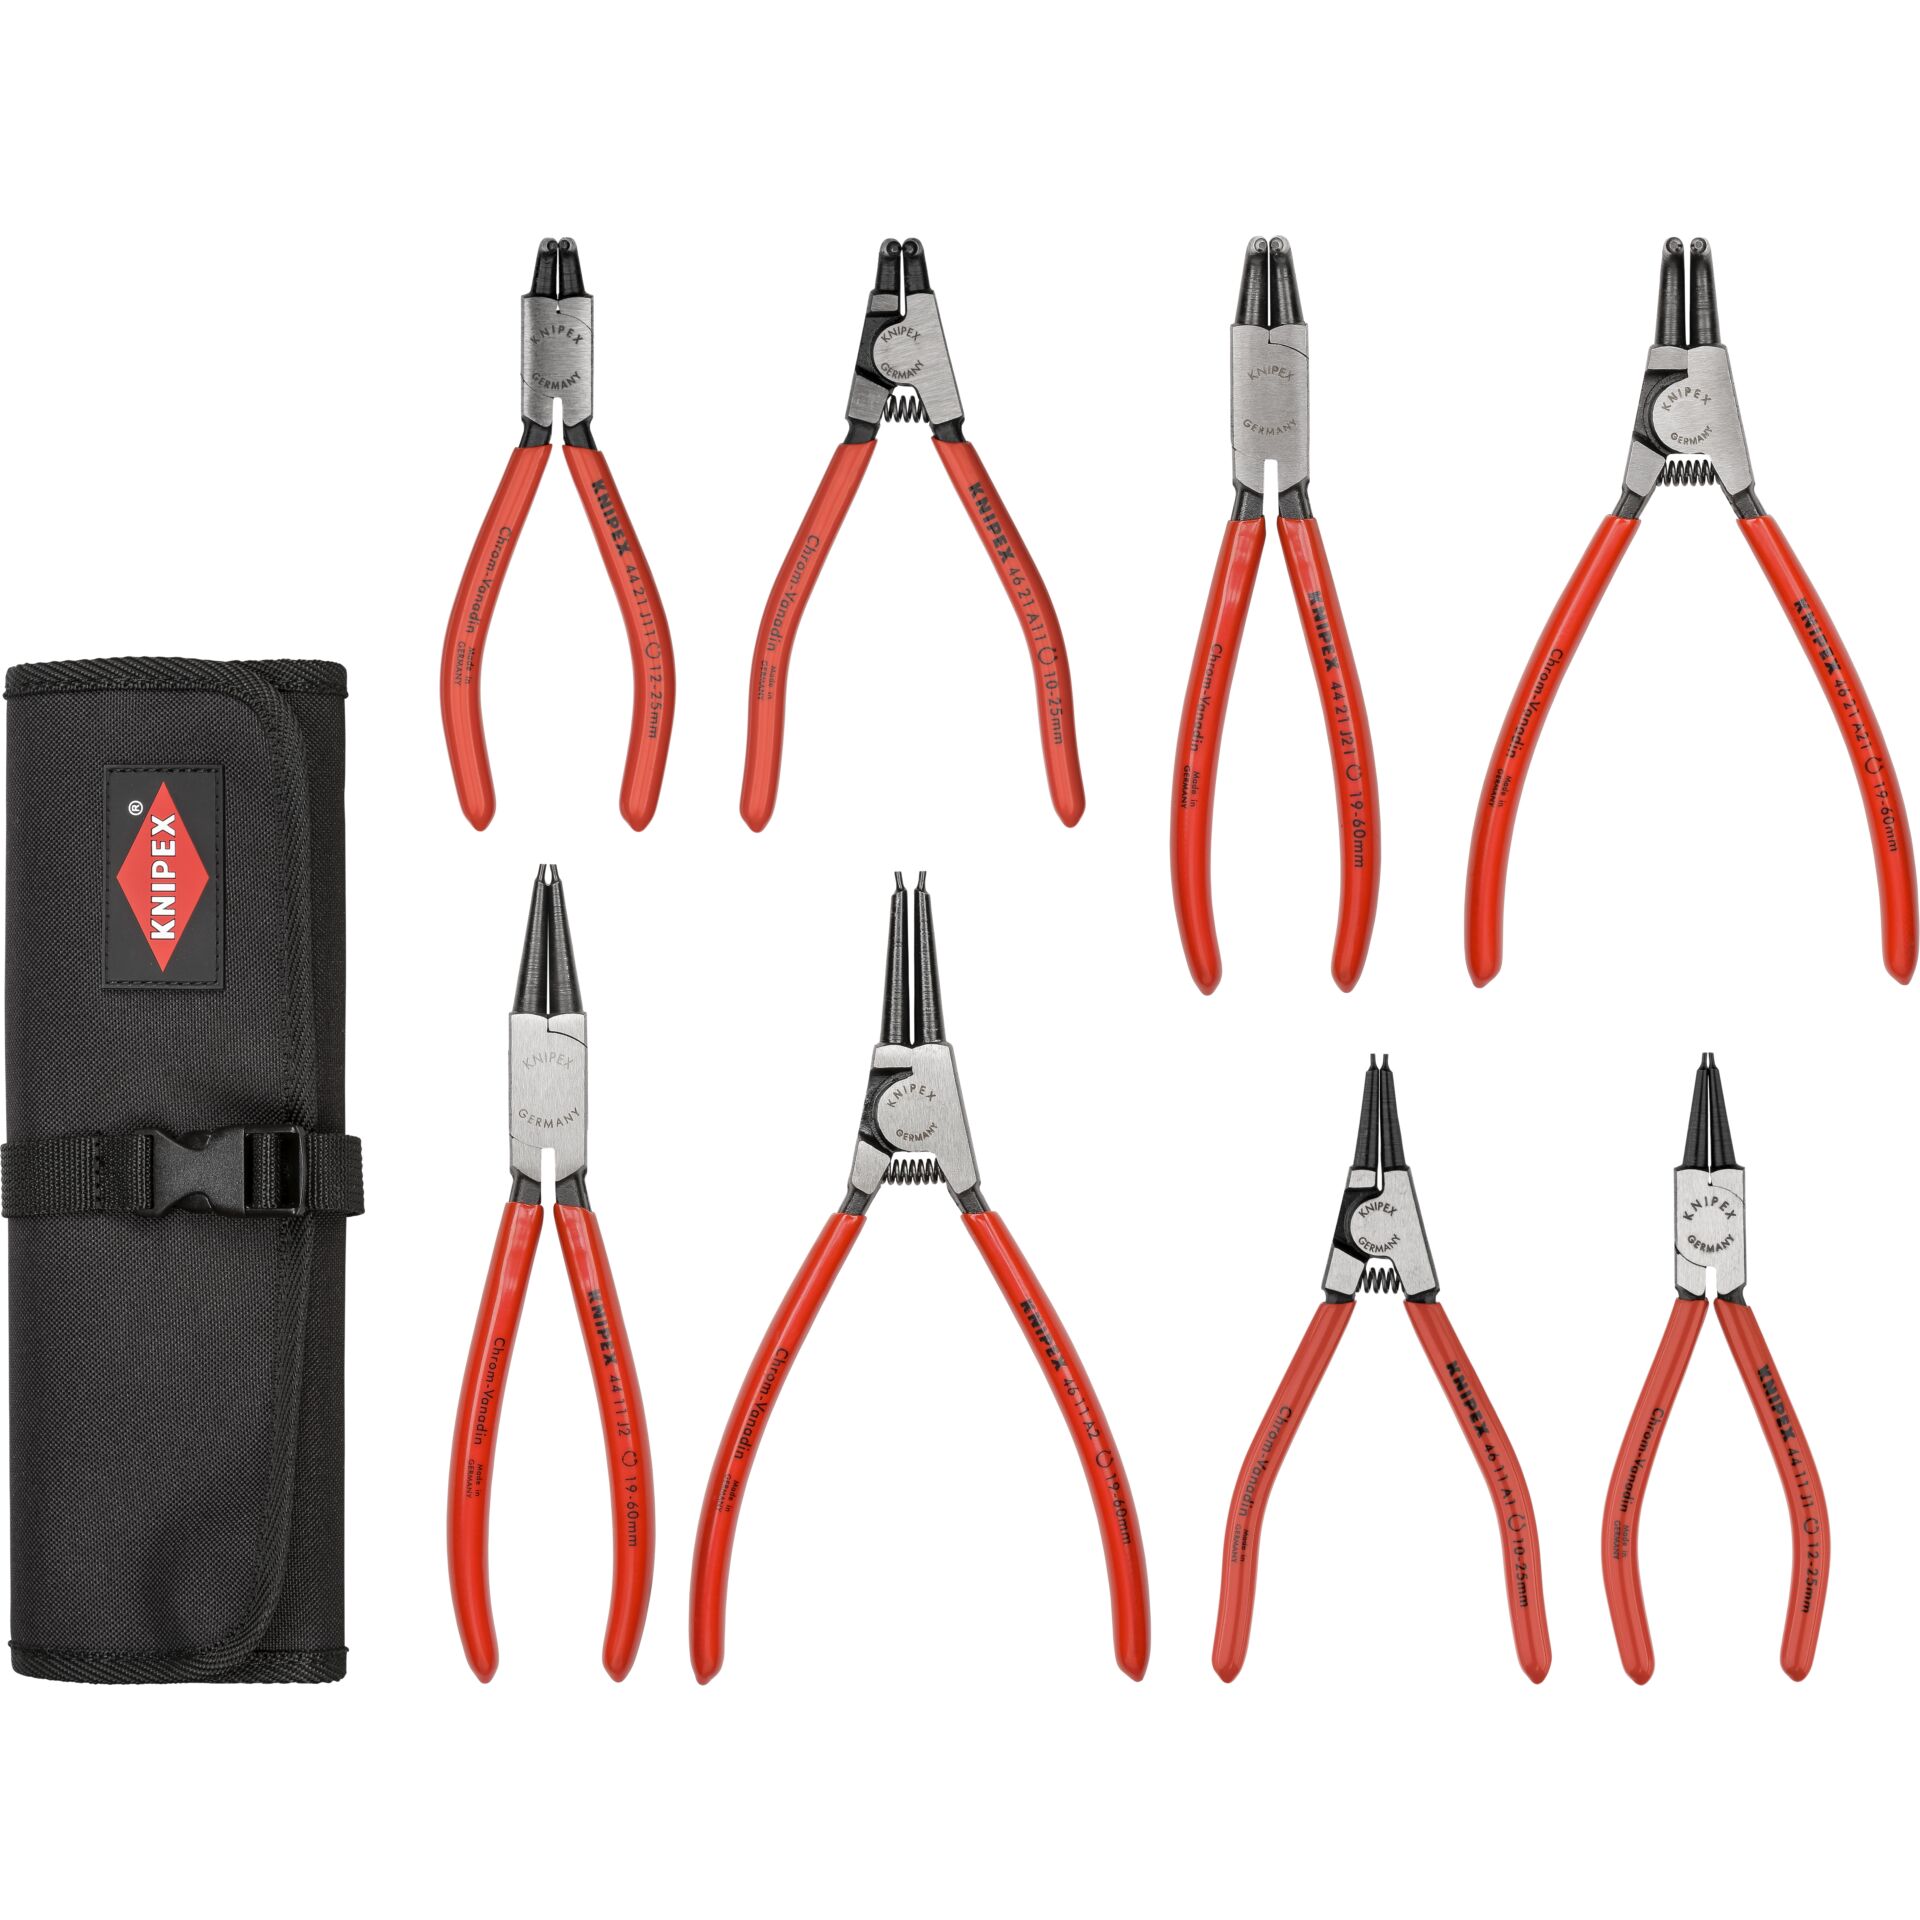 KNIPEX Circlip Pliers Set Case with 8 Pliers